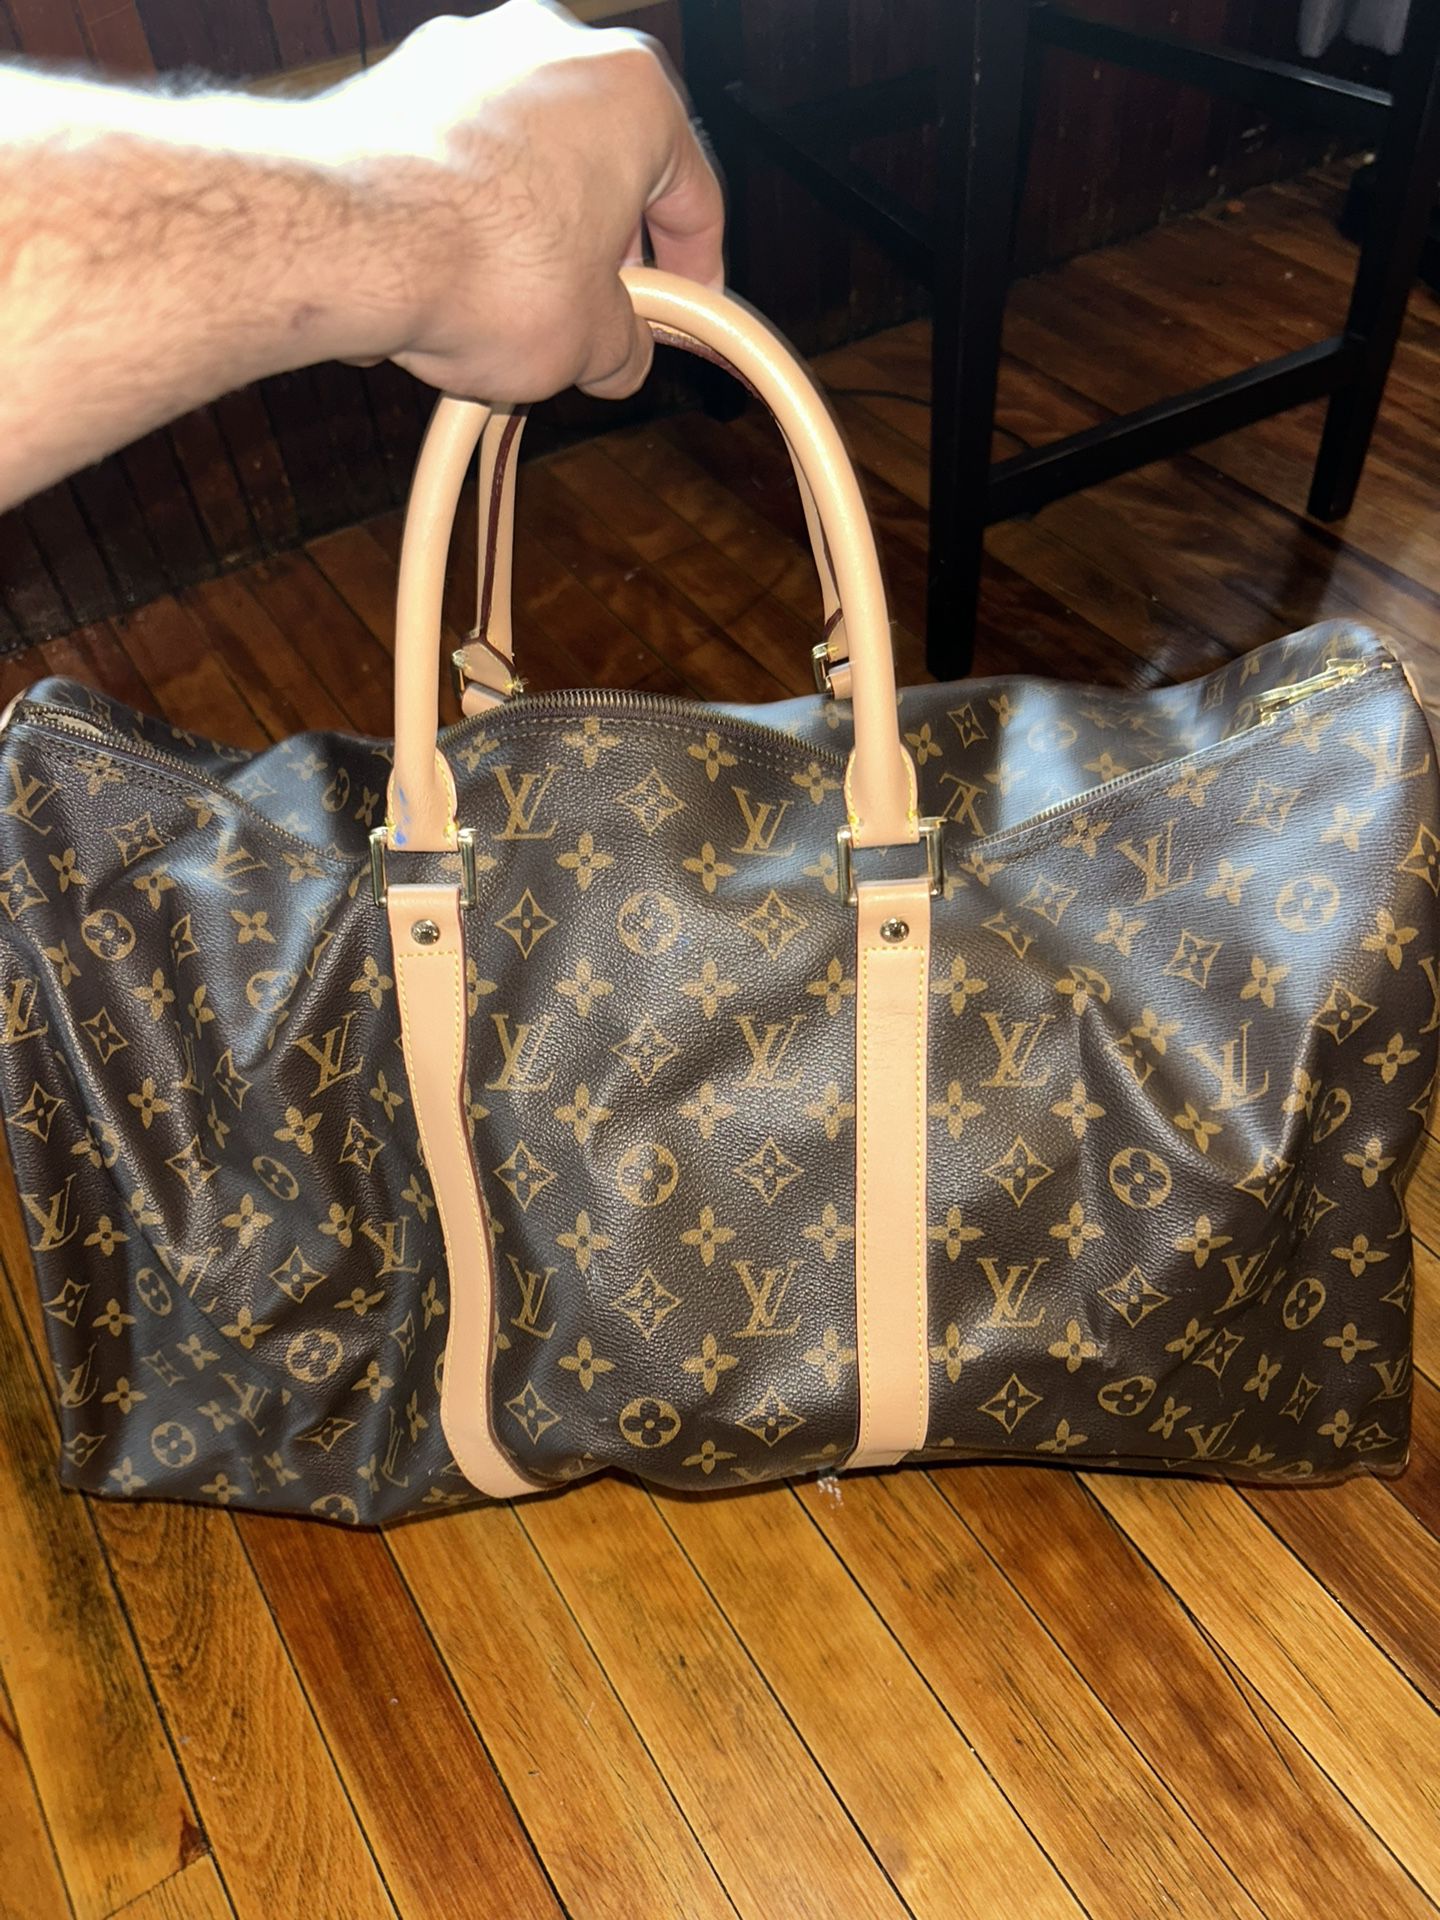 Legit Lv Duffle Bag For Sale for Sale in Manchester, NH - OfferUp